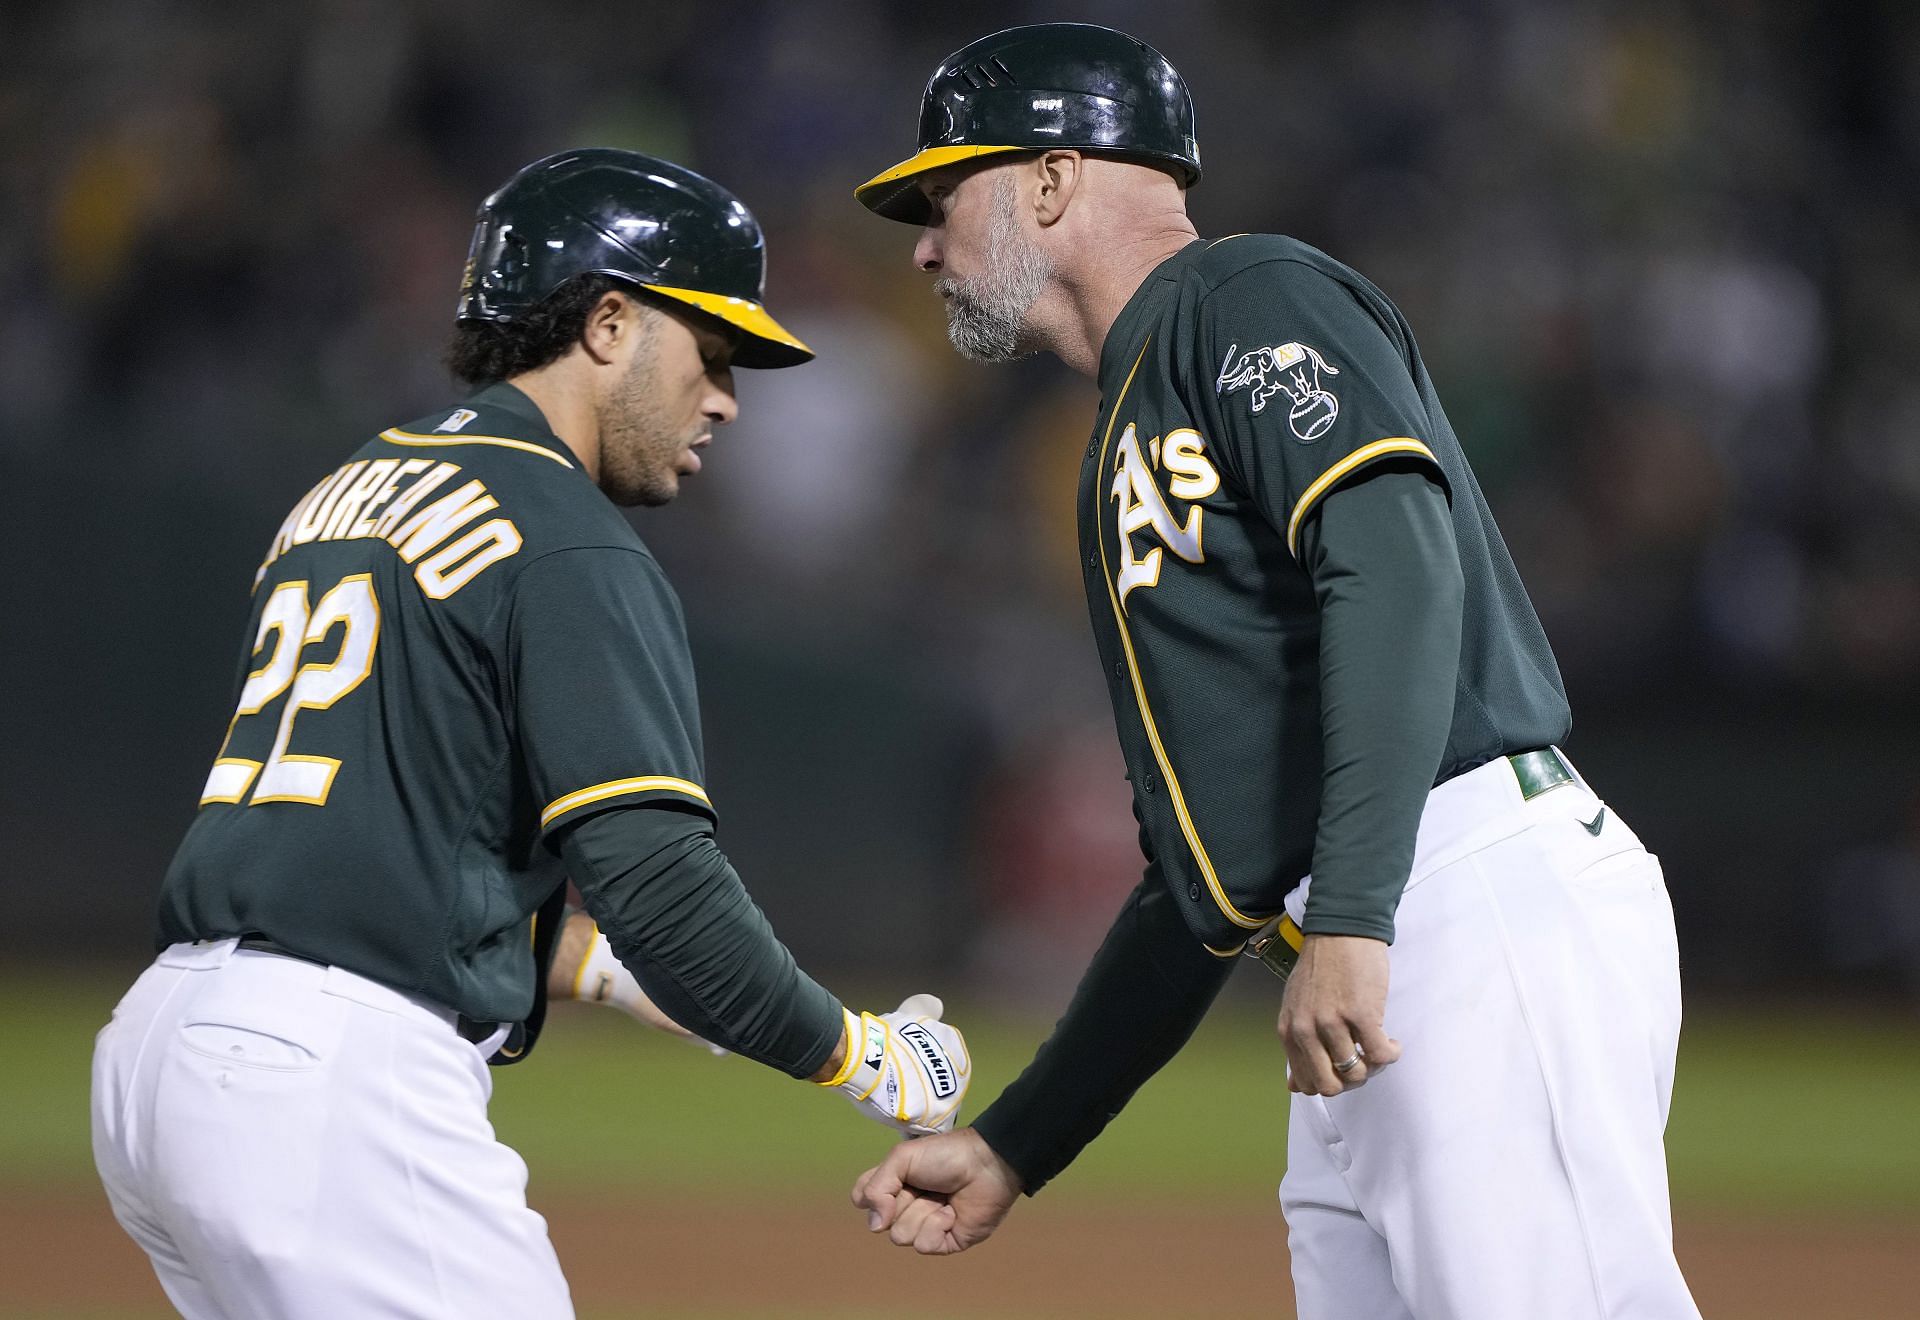 My approach is to establish identity here - Oakland Athletics